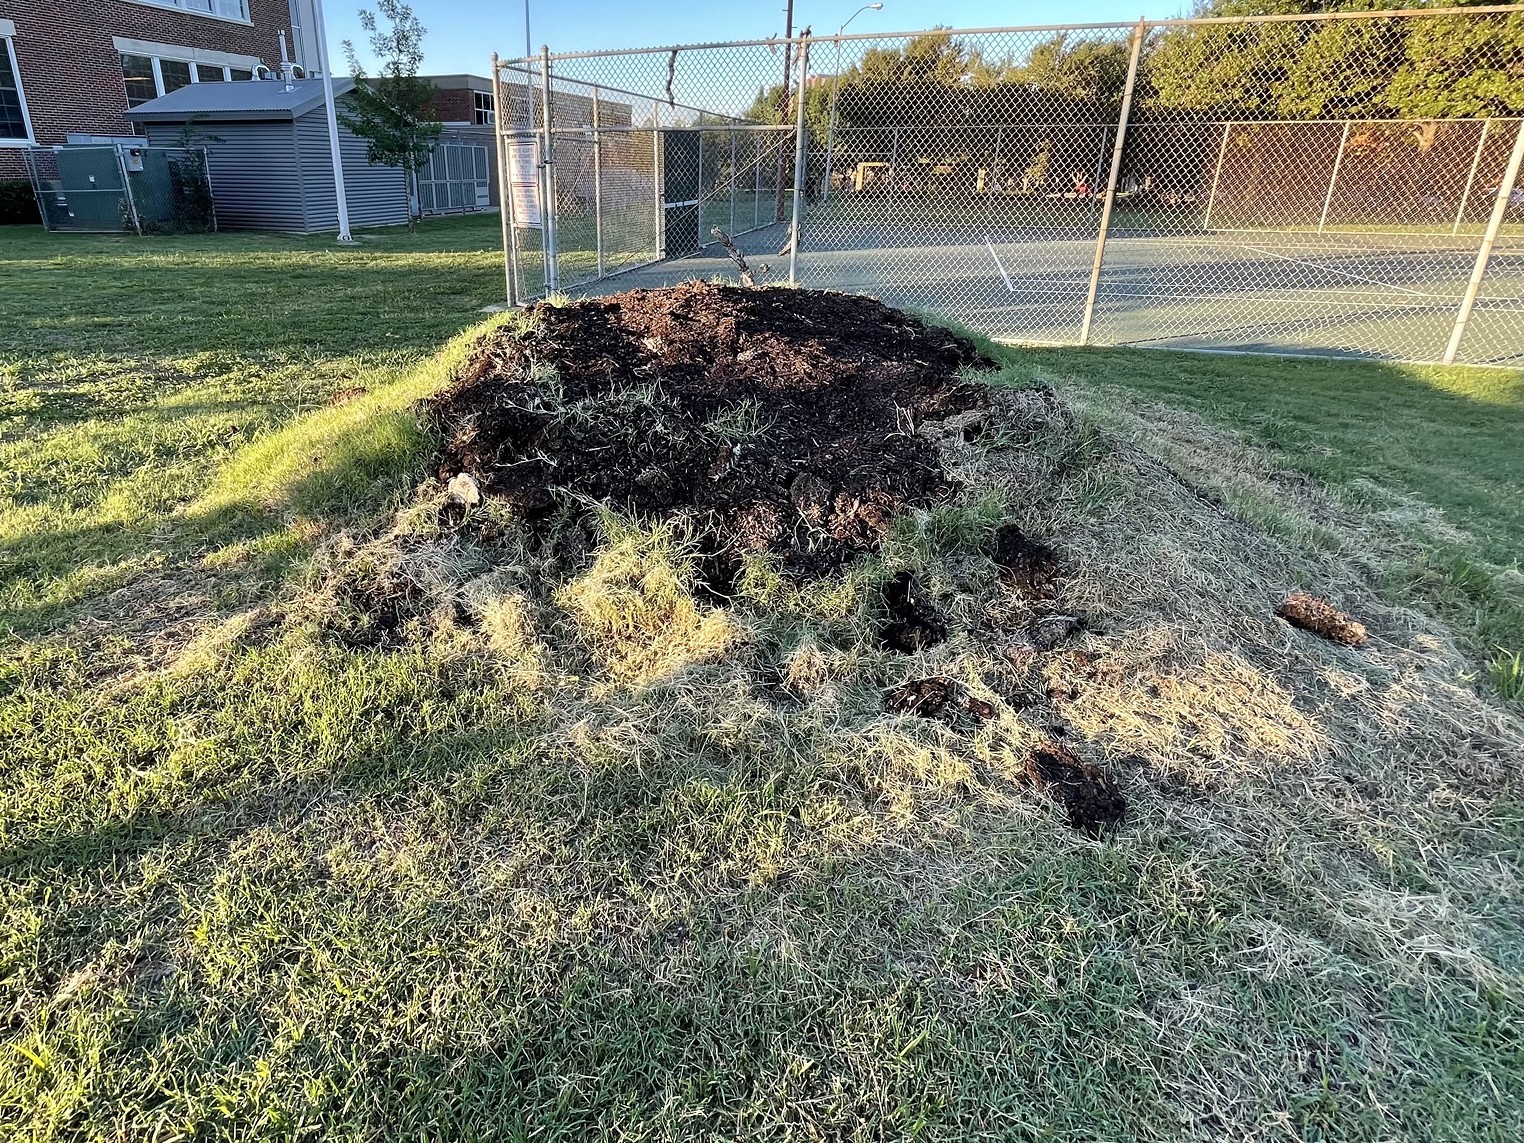 Dallas Removes Mulch Pile at Cochran Park After Residents' Months-Long Push for Action